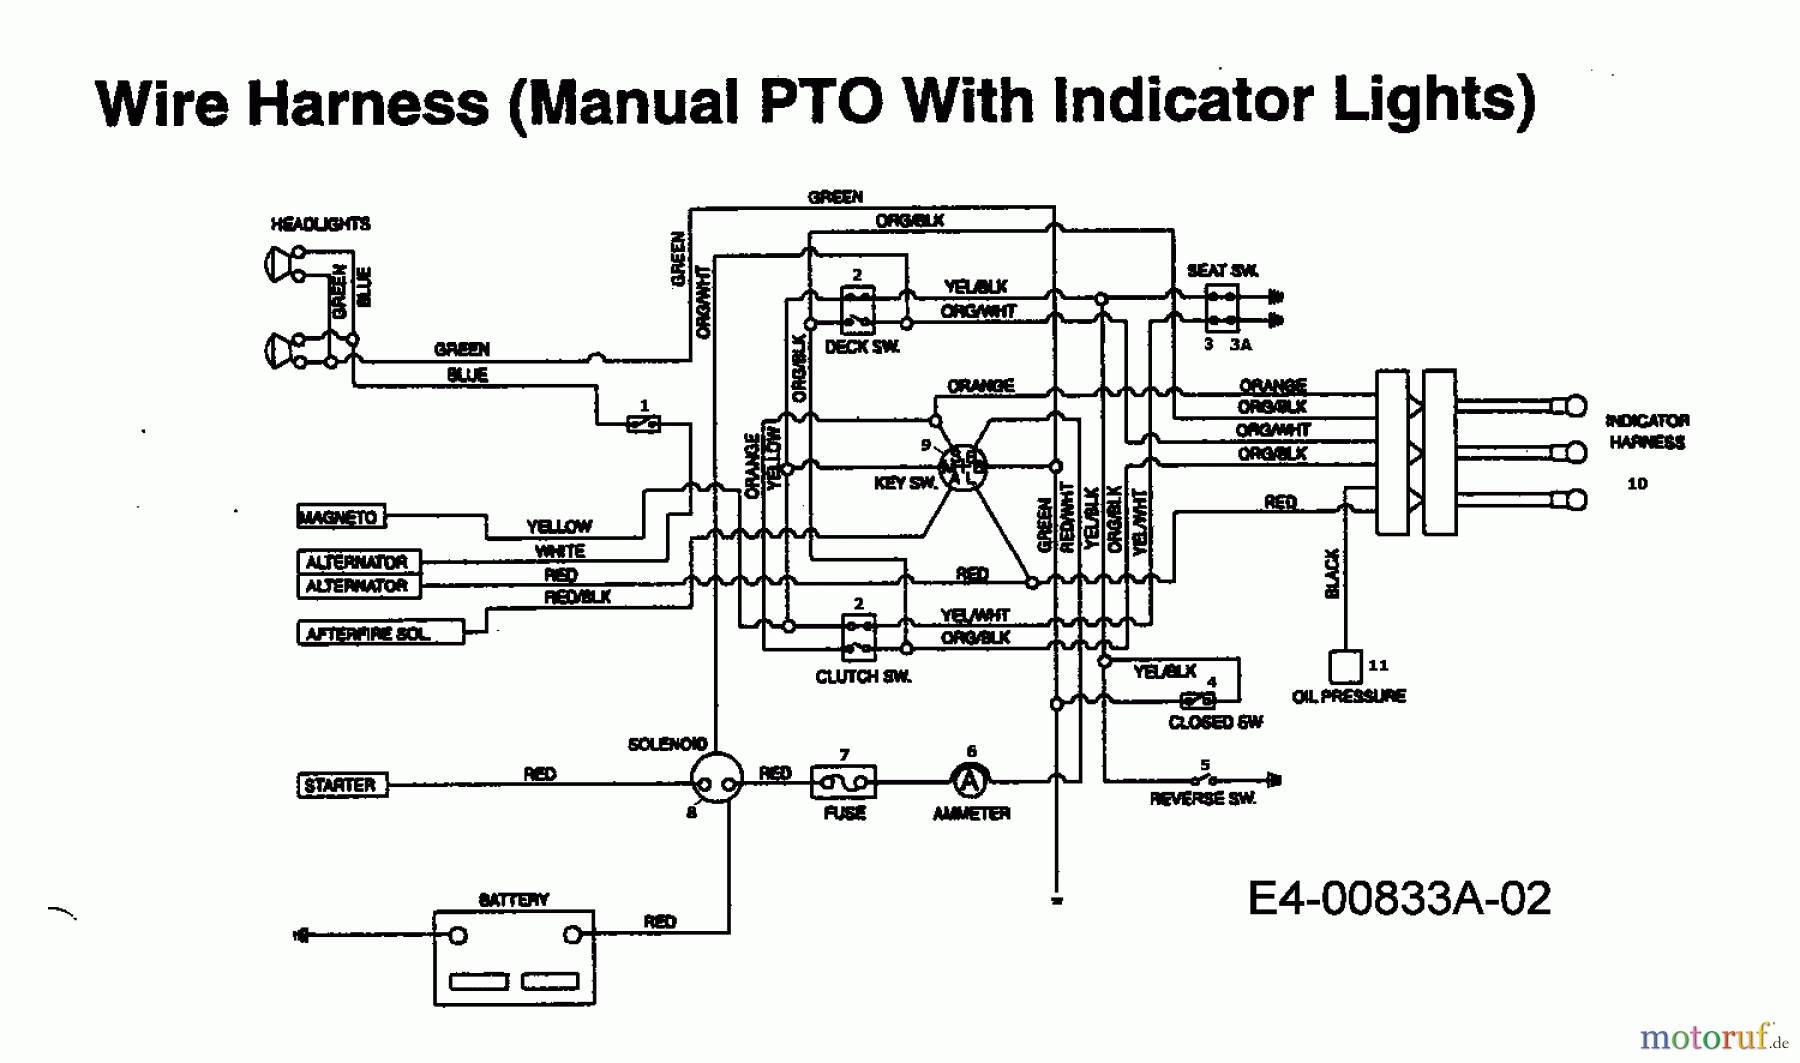  MTD Lawn tractors EH/160 13AT795N678  (1998) Wiring diagram with indicator lights